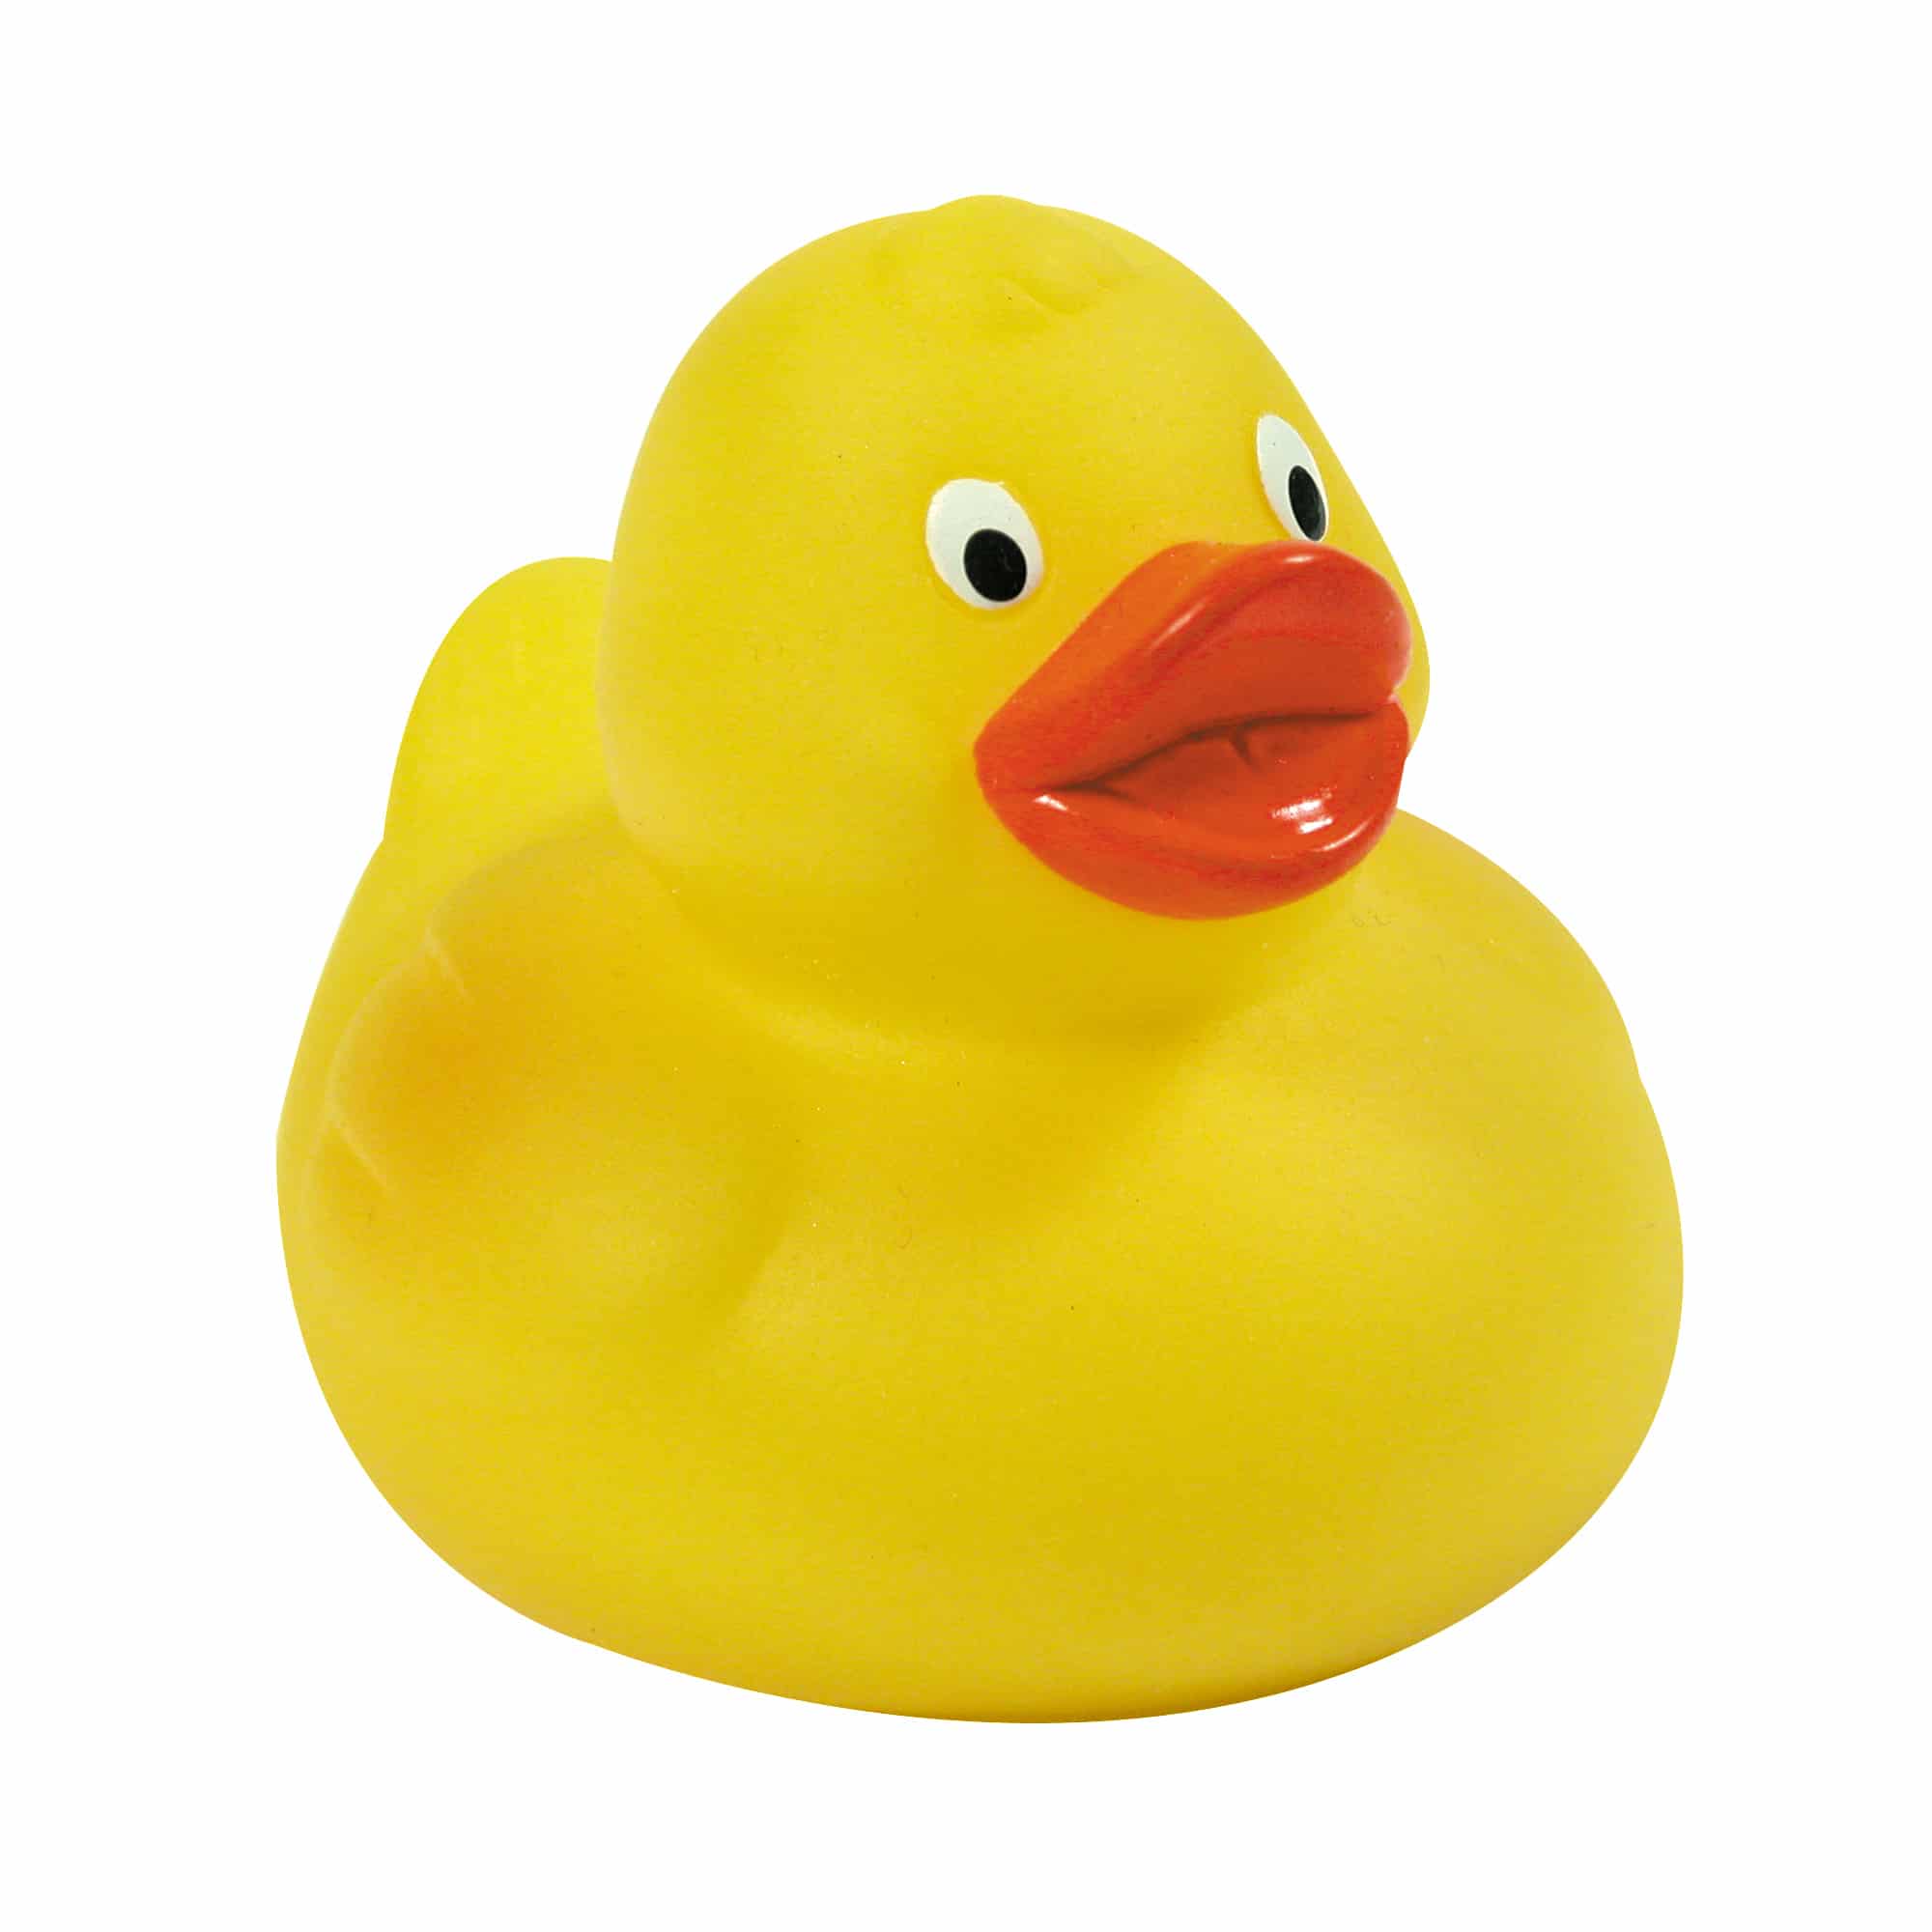 Rubber Ducky Yellow Classic Bath Toy